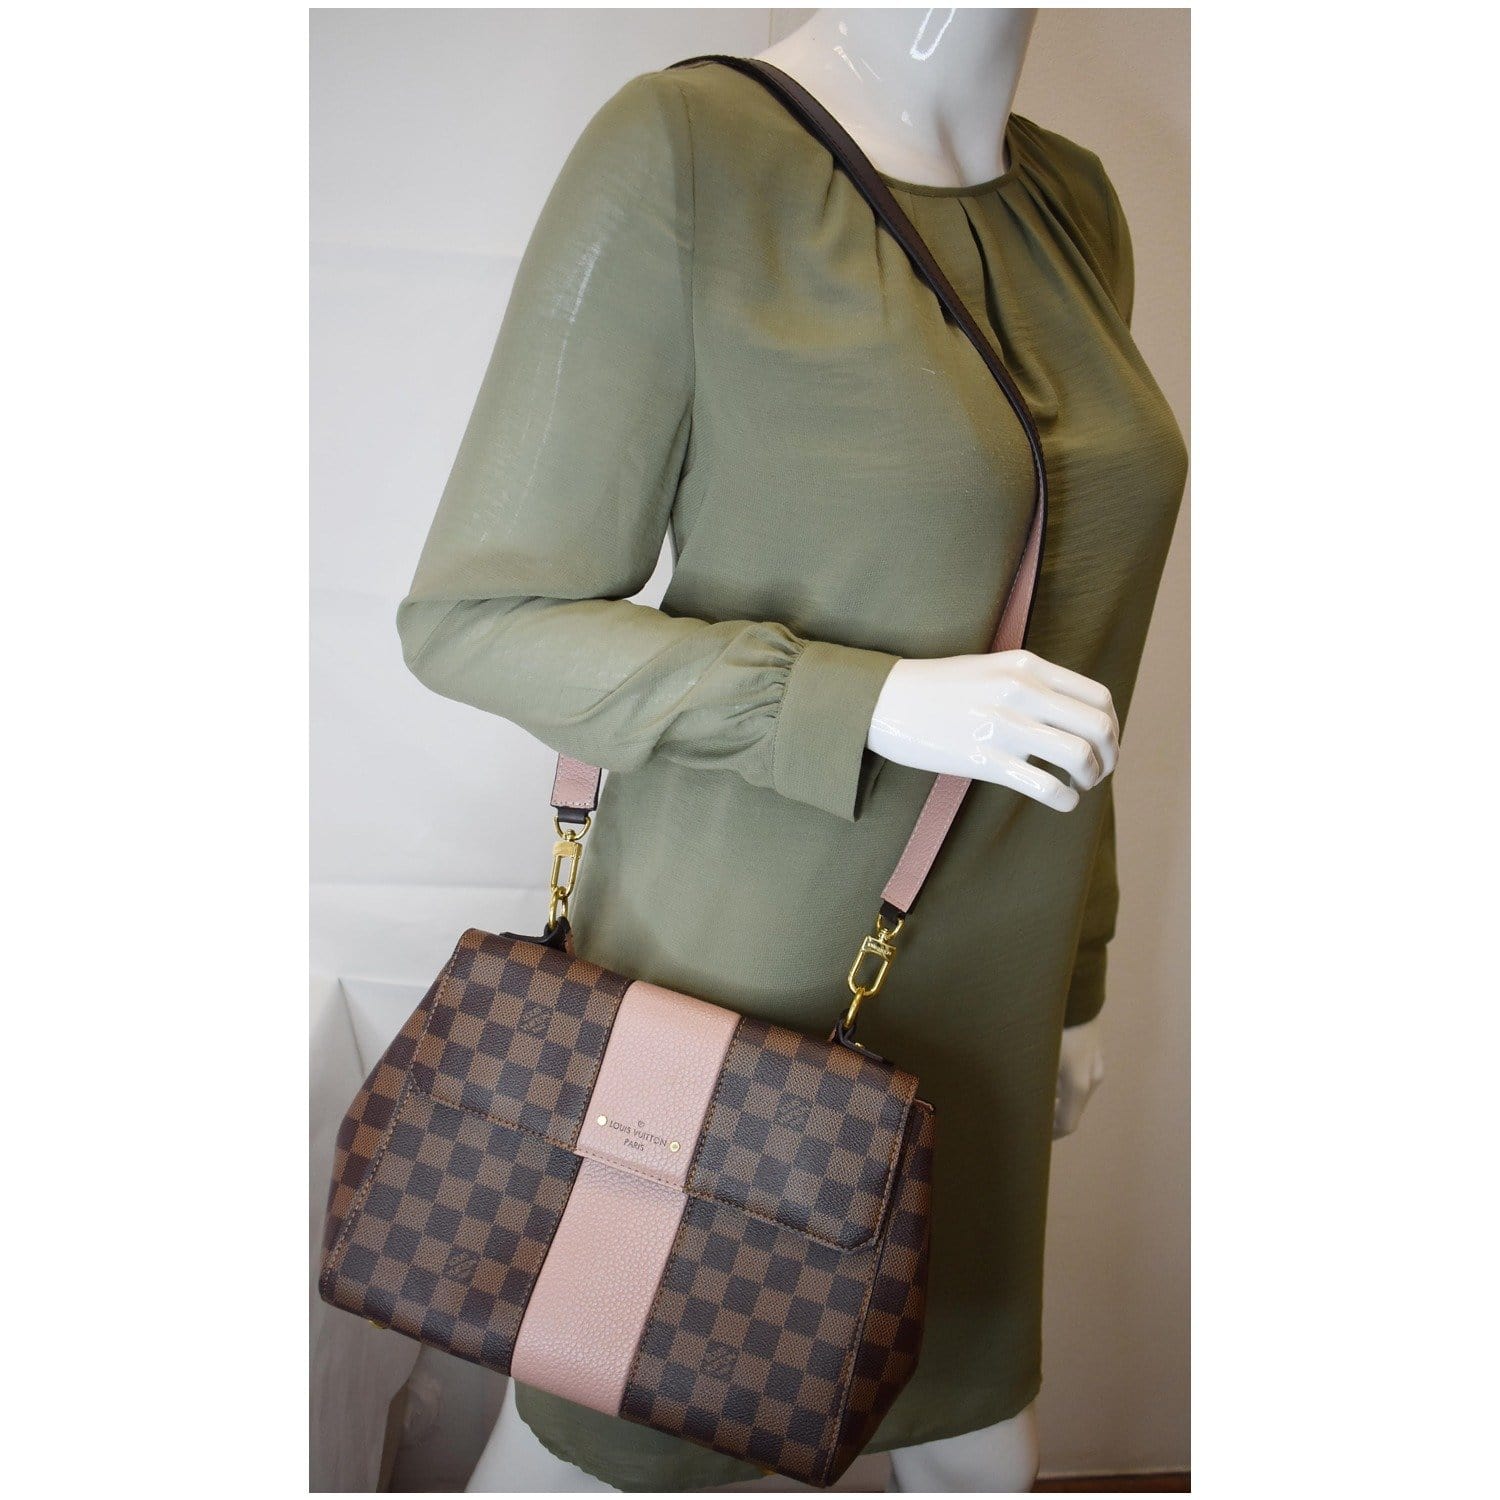 Louis Vuitton Bond Street MM in Damier Ebene with Pink Leather